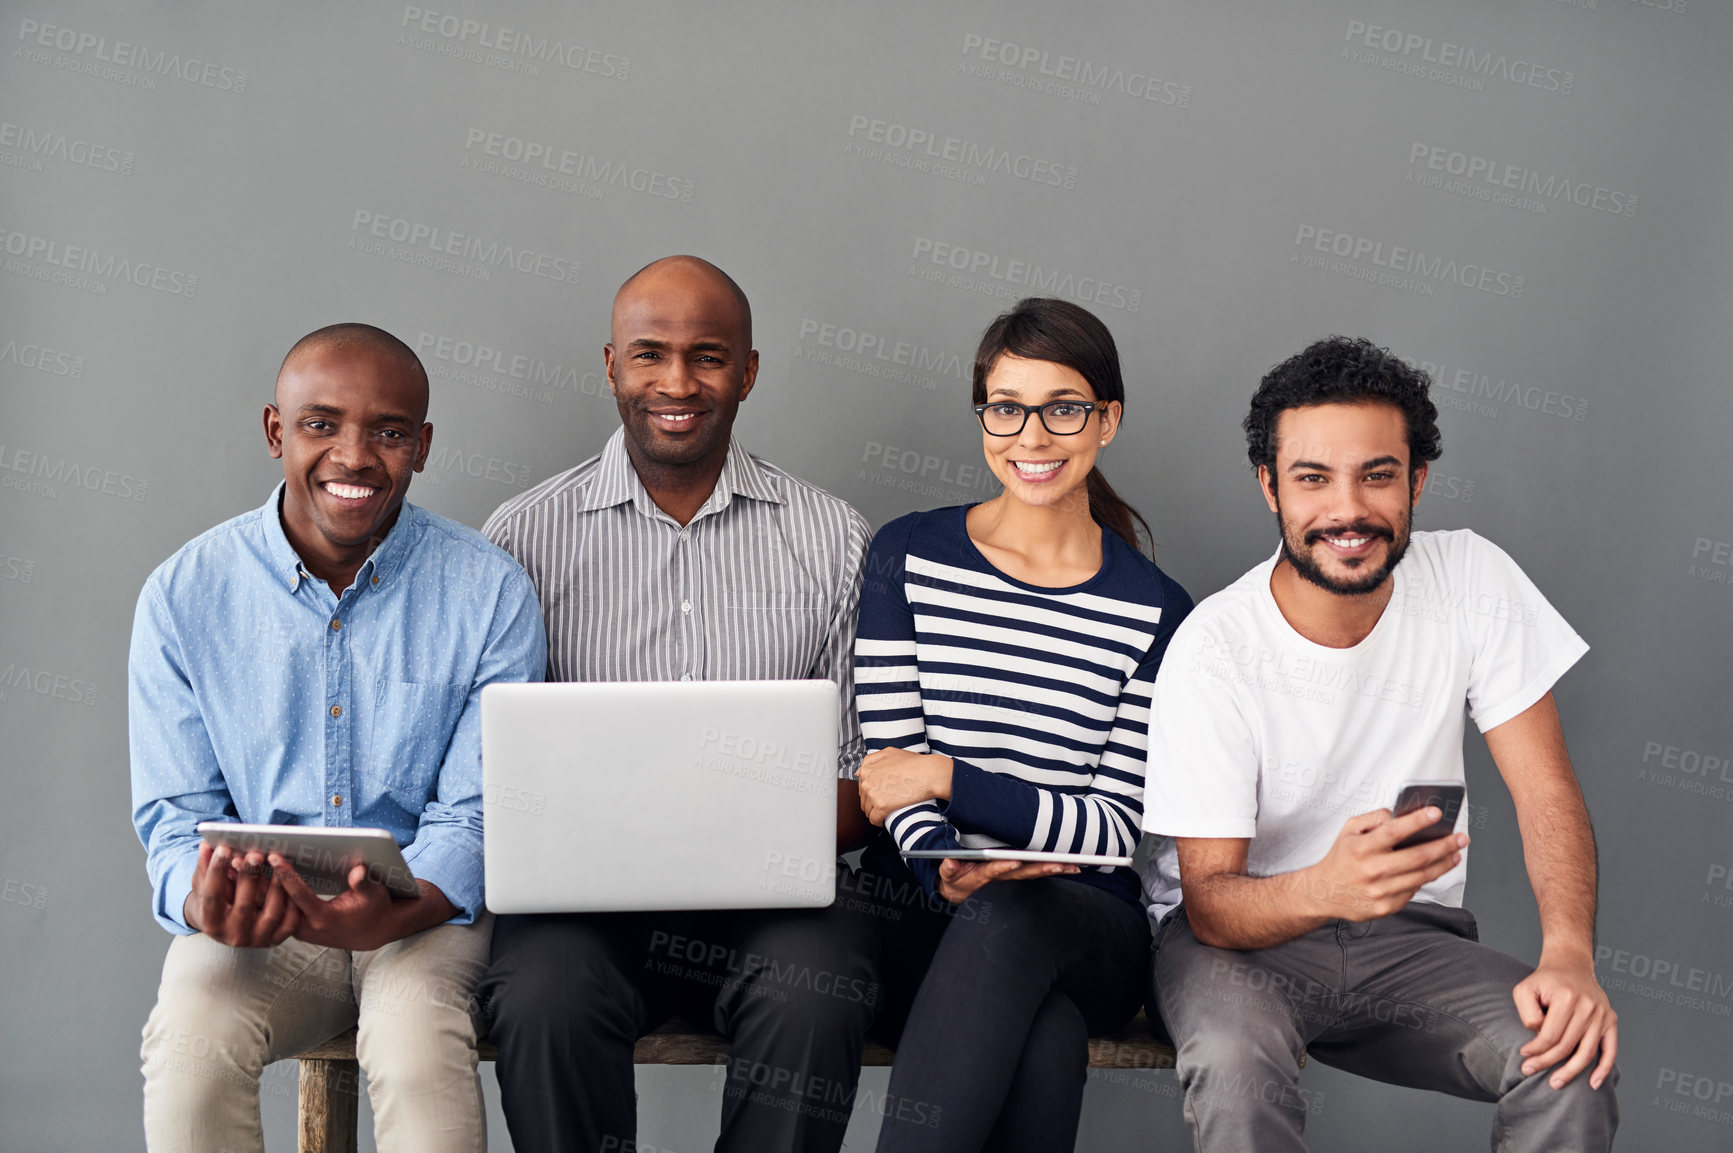 Buy stock photo Studio shot of businesspeople using wireless technology against a gray background